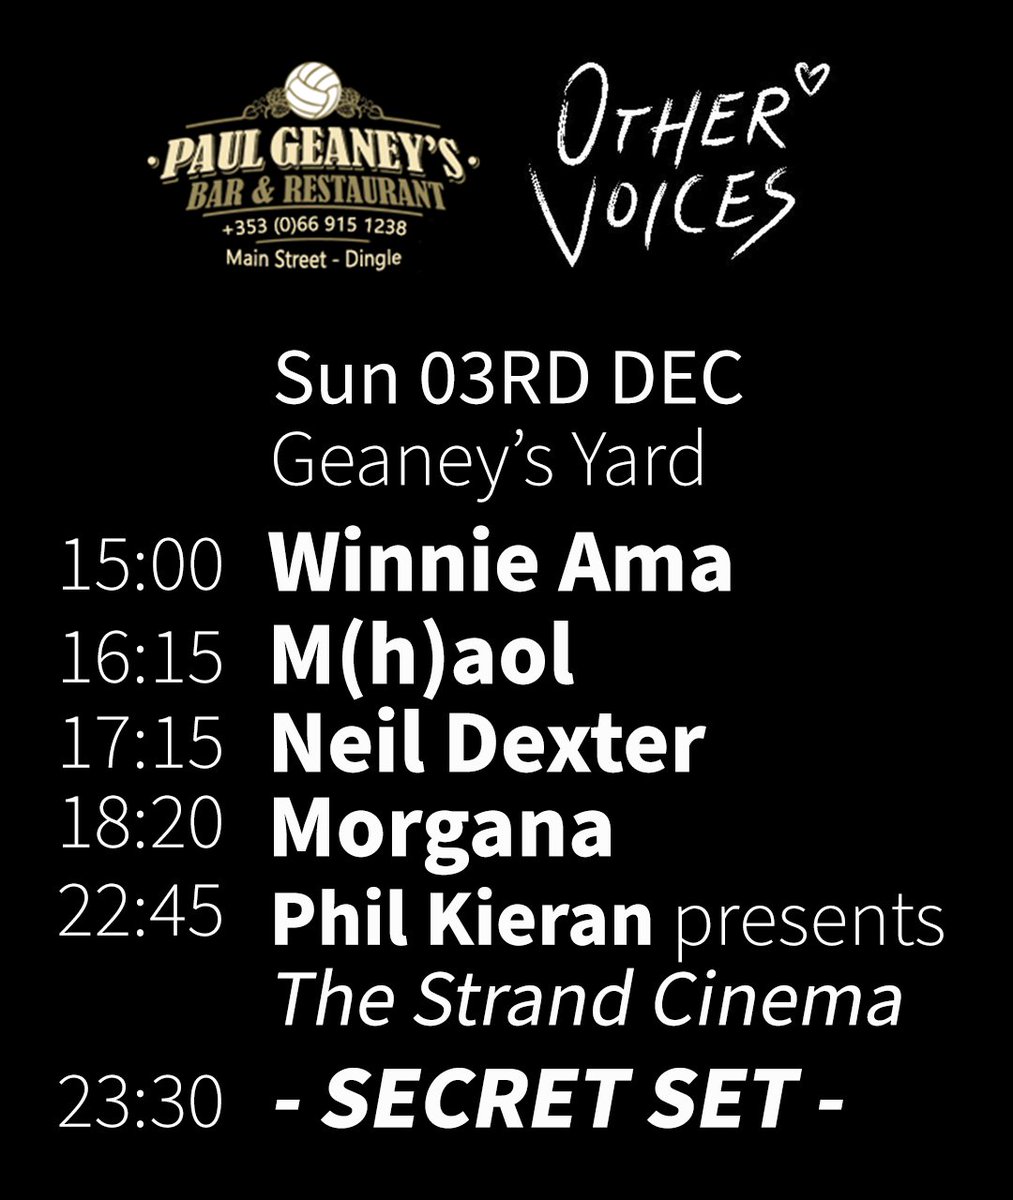 Sunday 3rd Dec - Day 3 of Other Voices at Geaney's.....

Get all the details on othervoices.ie

#paulgeaneysbar #dingle #OV2023